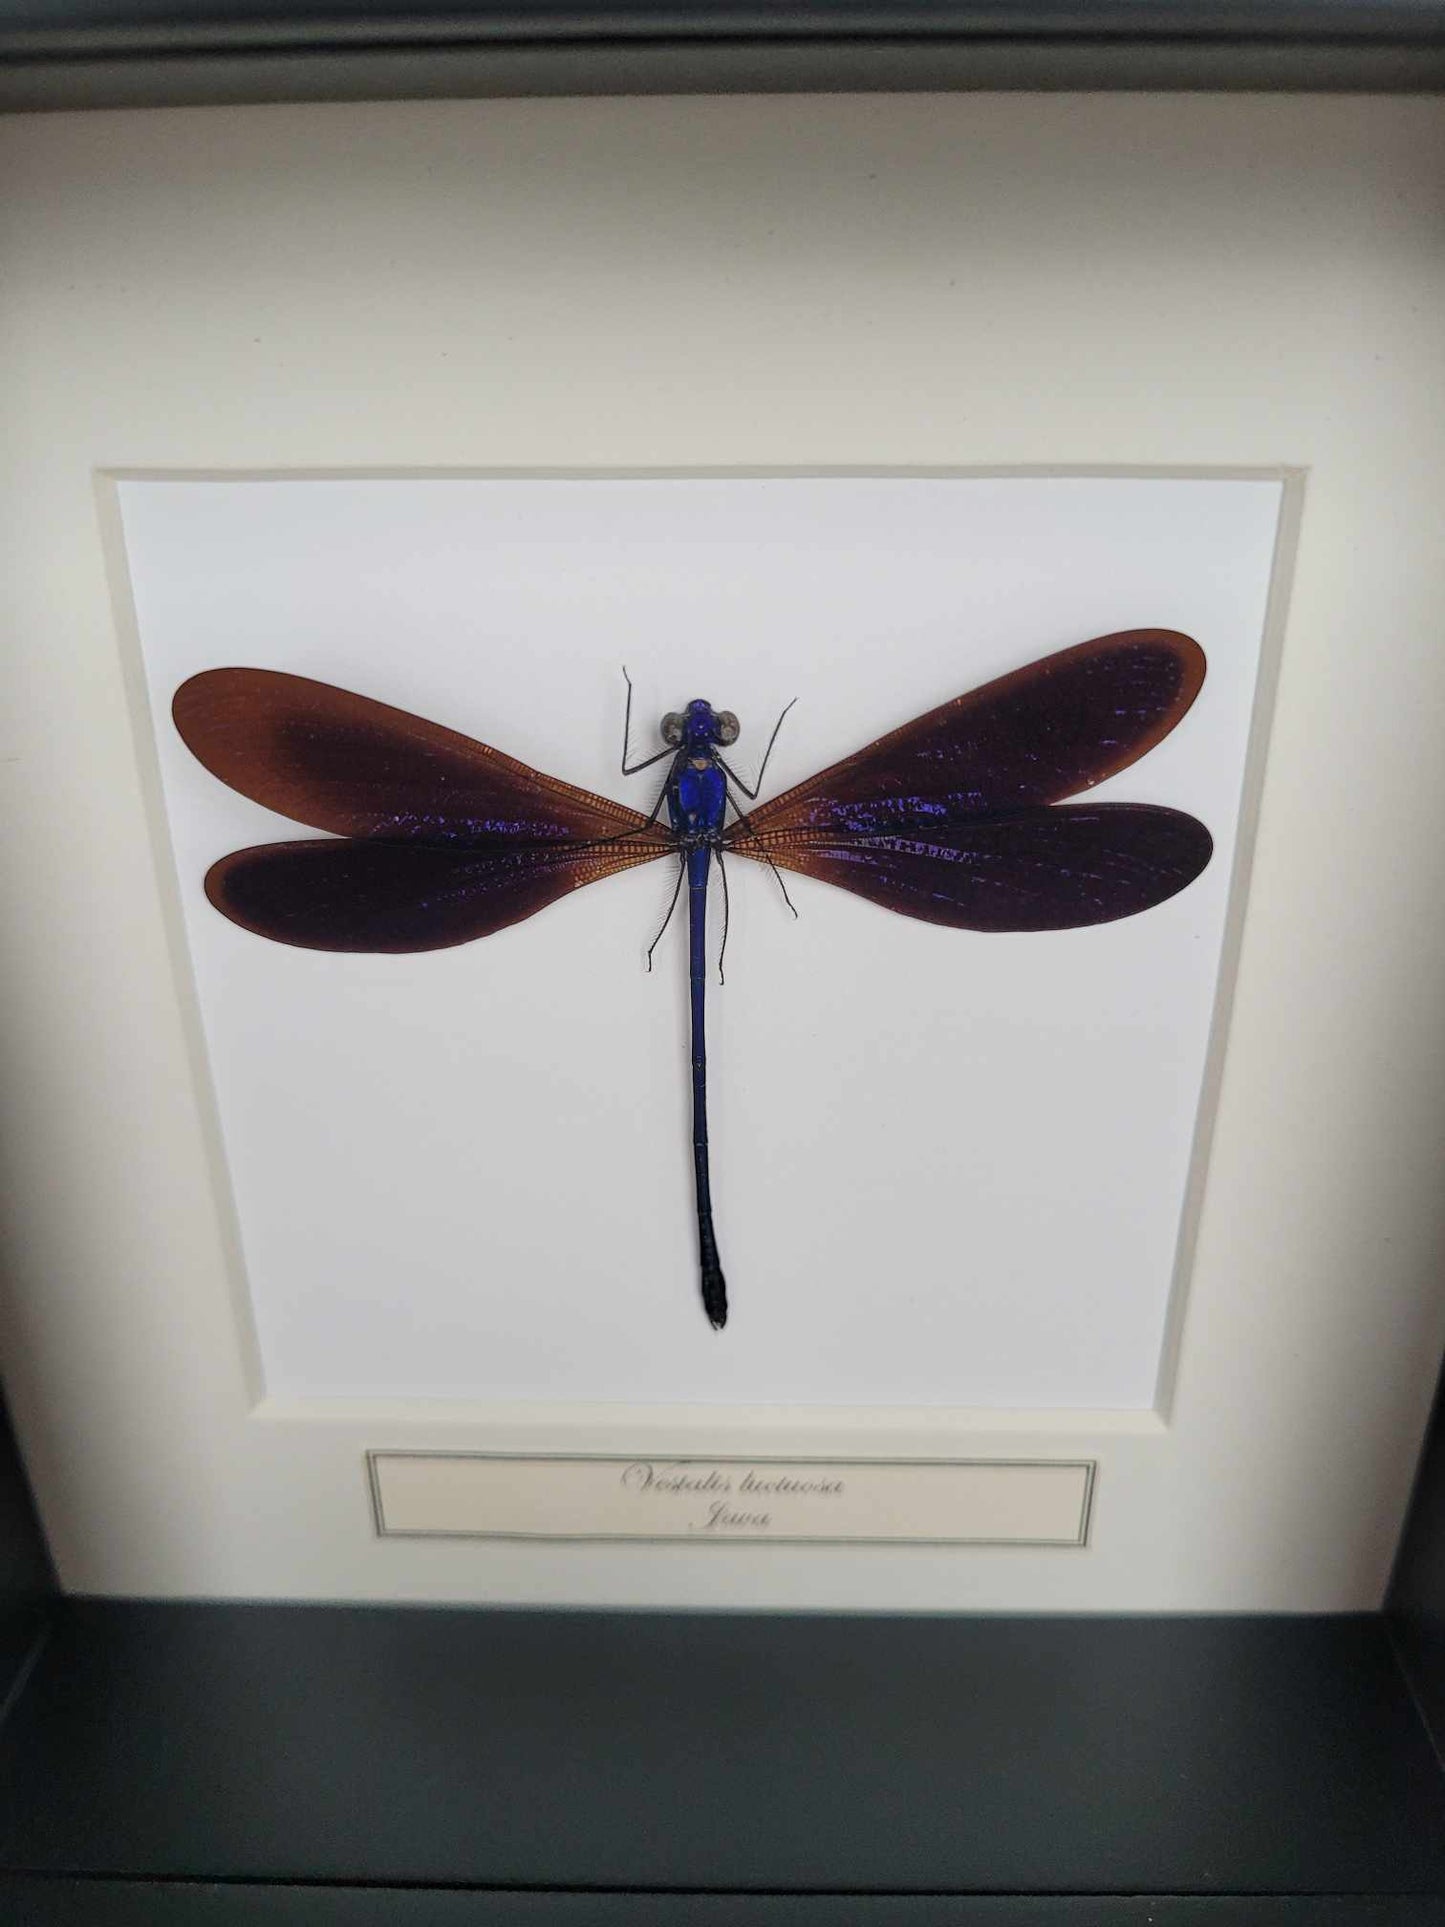 Vestalis Luctuosa - Dragonfly